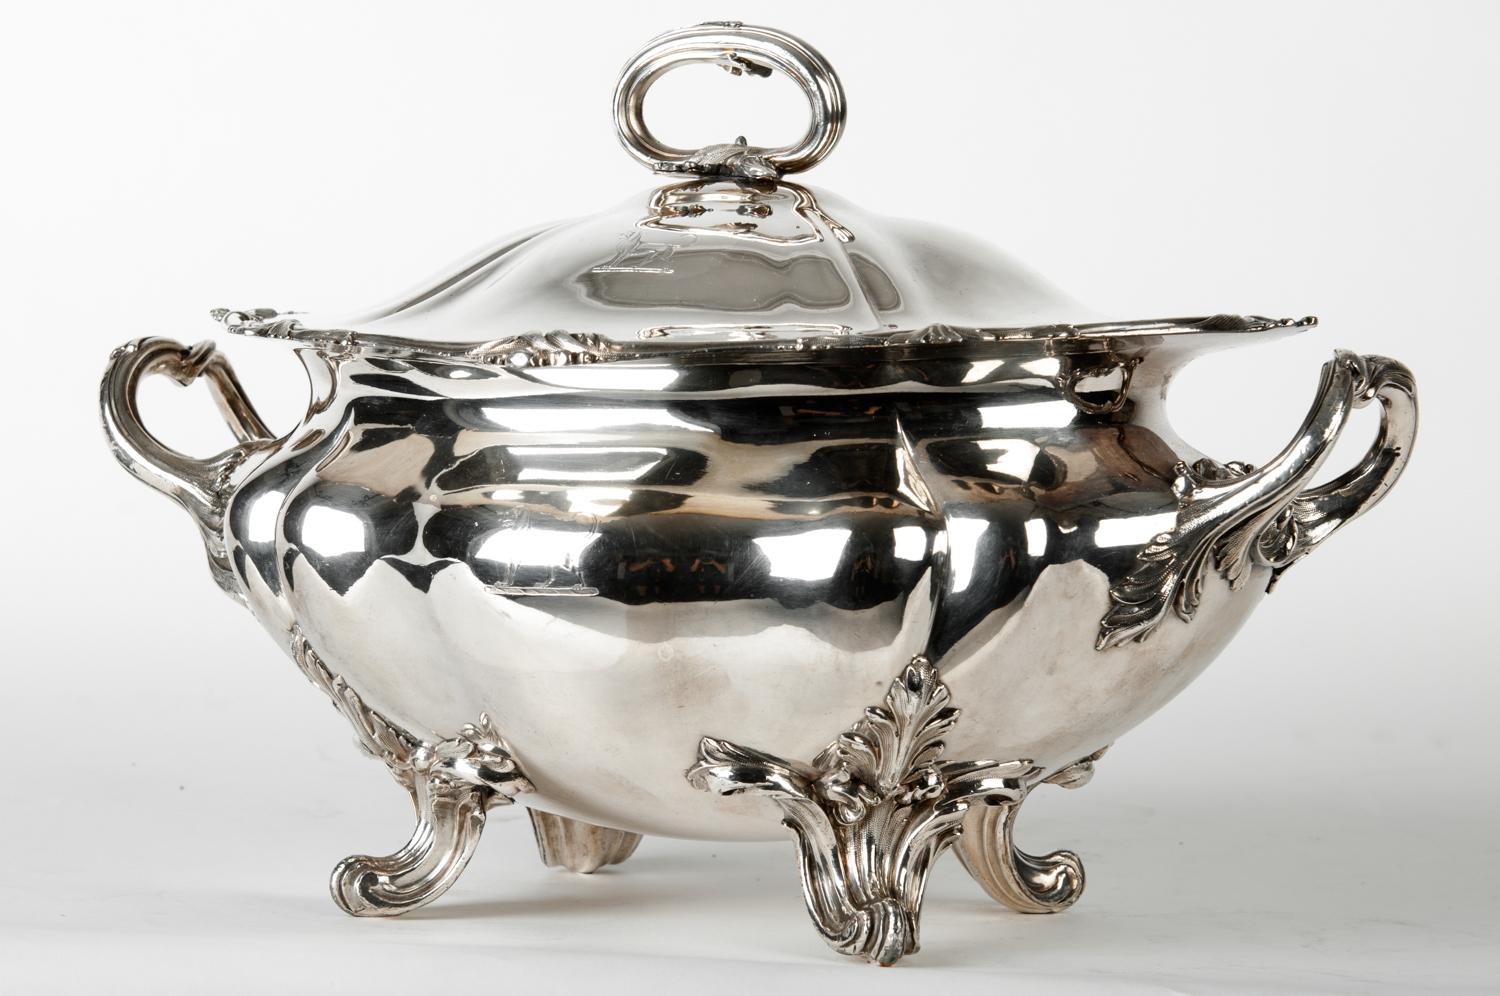 Late 19th century English Sheffield silver plated / copper tableware covered tureen with sides handle. The tureen is in great antique condition, minor wear consistent with age / use. Maker's mark undersigned. The covered tureen stands about 10